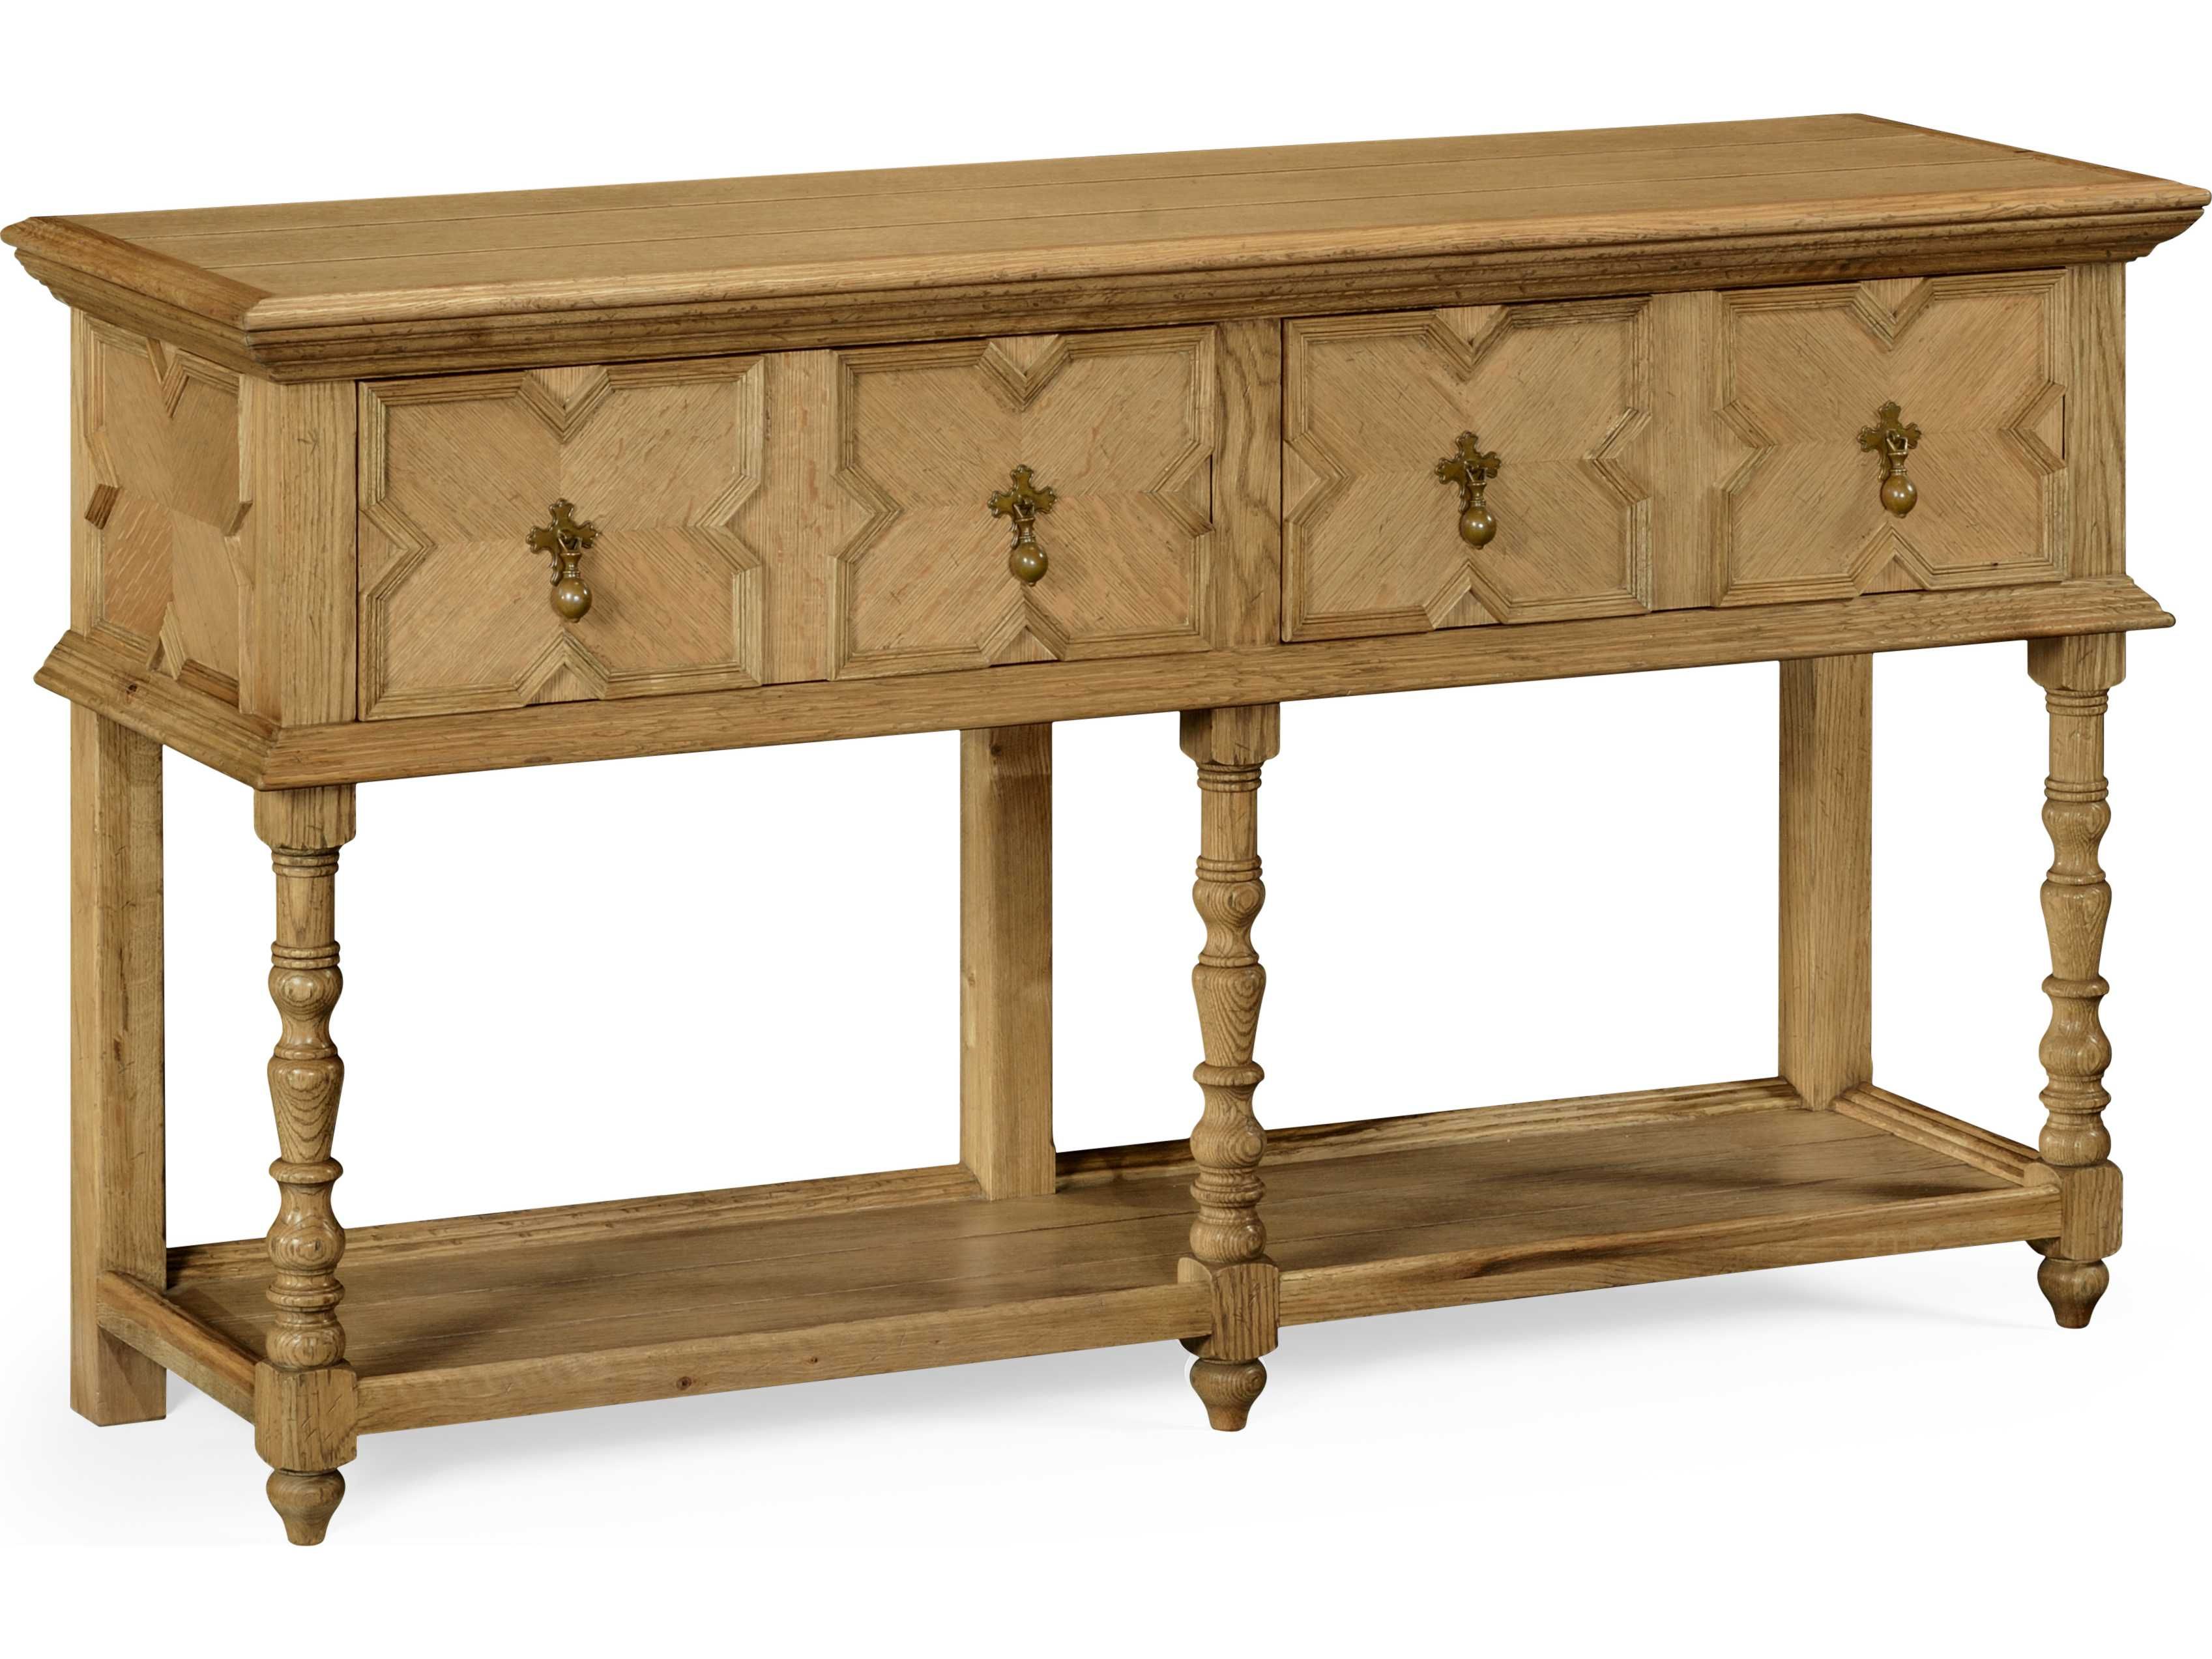 Jonathan Charles Natural Oak Light Natural Oak 64 X 20 Buffet Within Balboa Carved Console Tables (View 13 of 30)